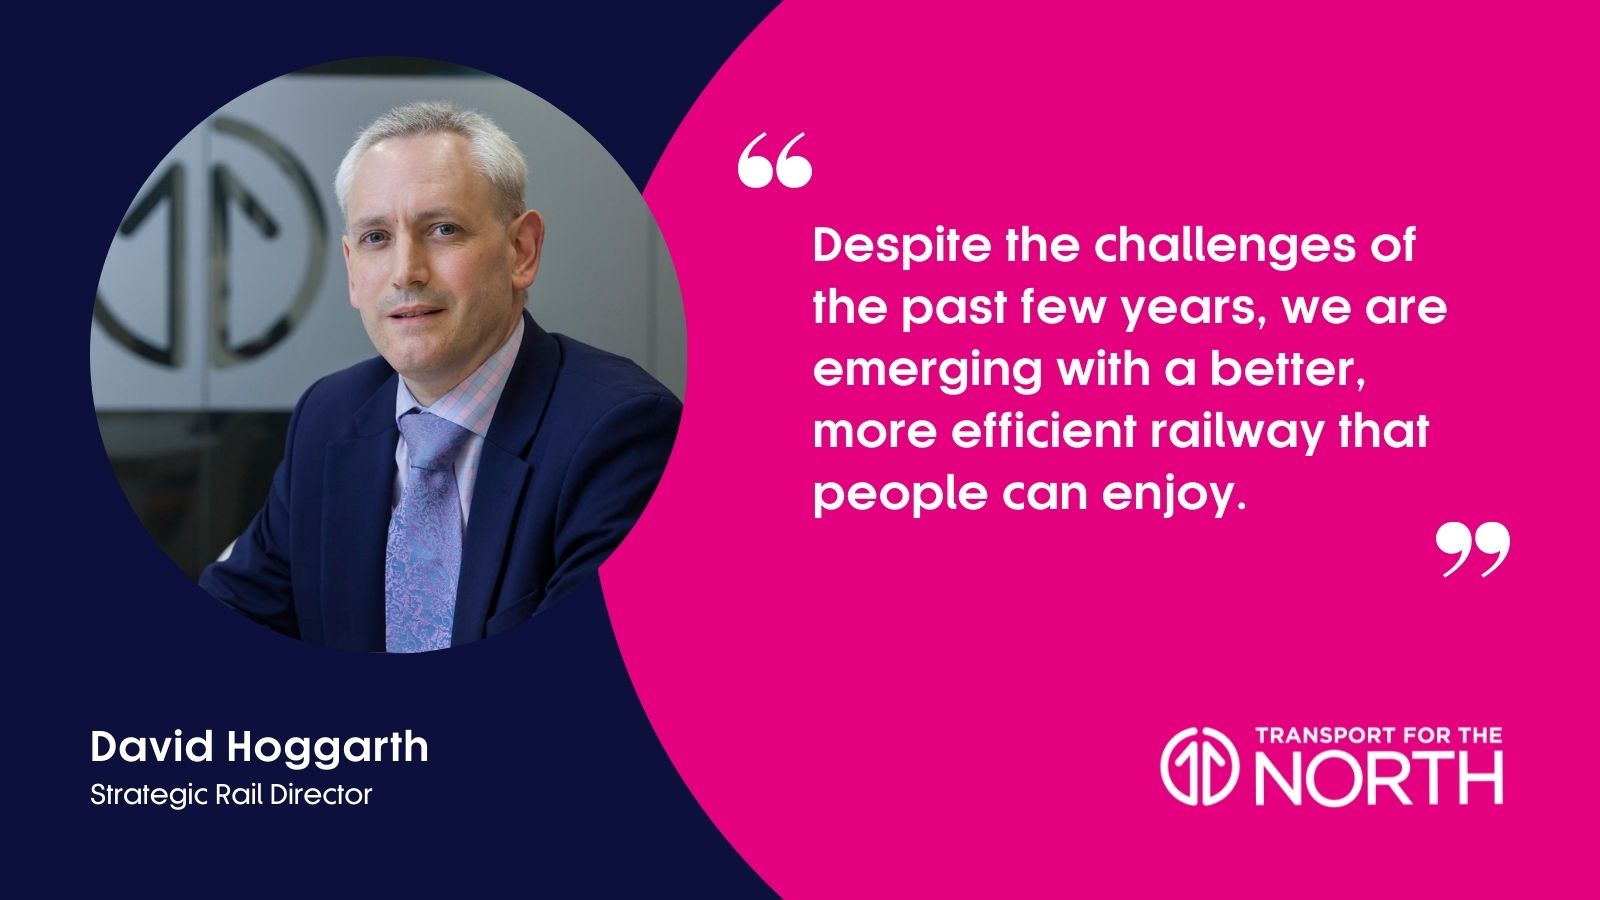 David Hoggarth comment after Community Rail User event